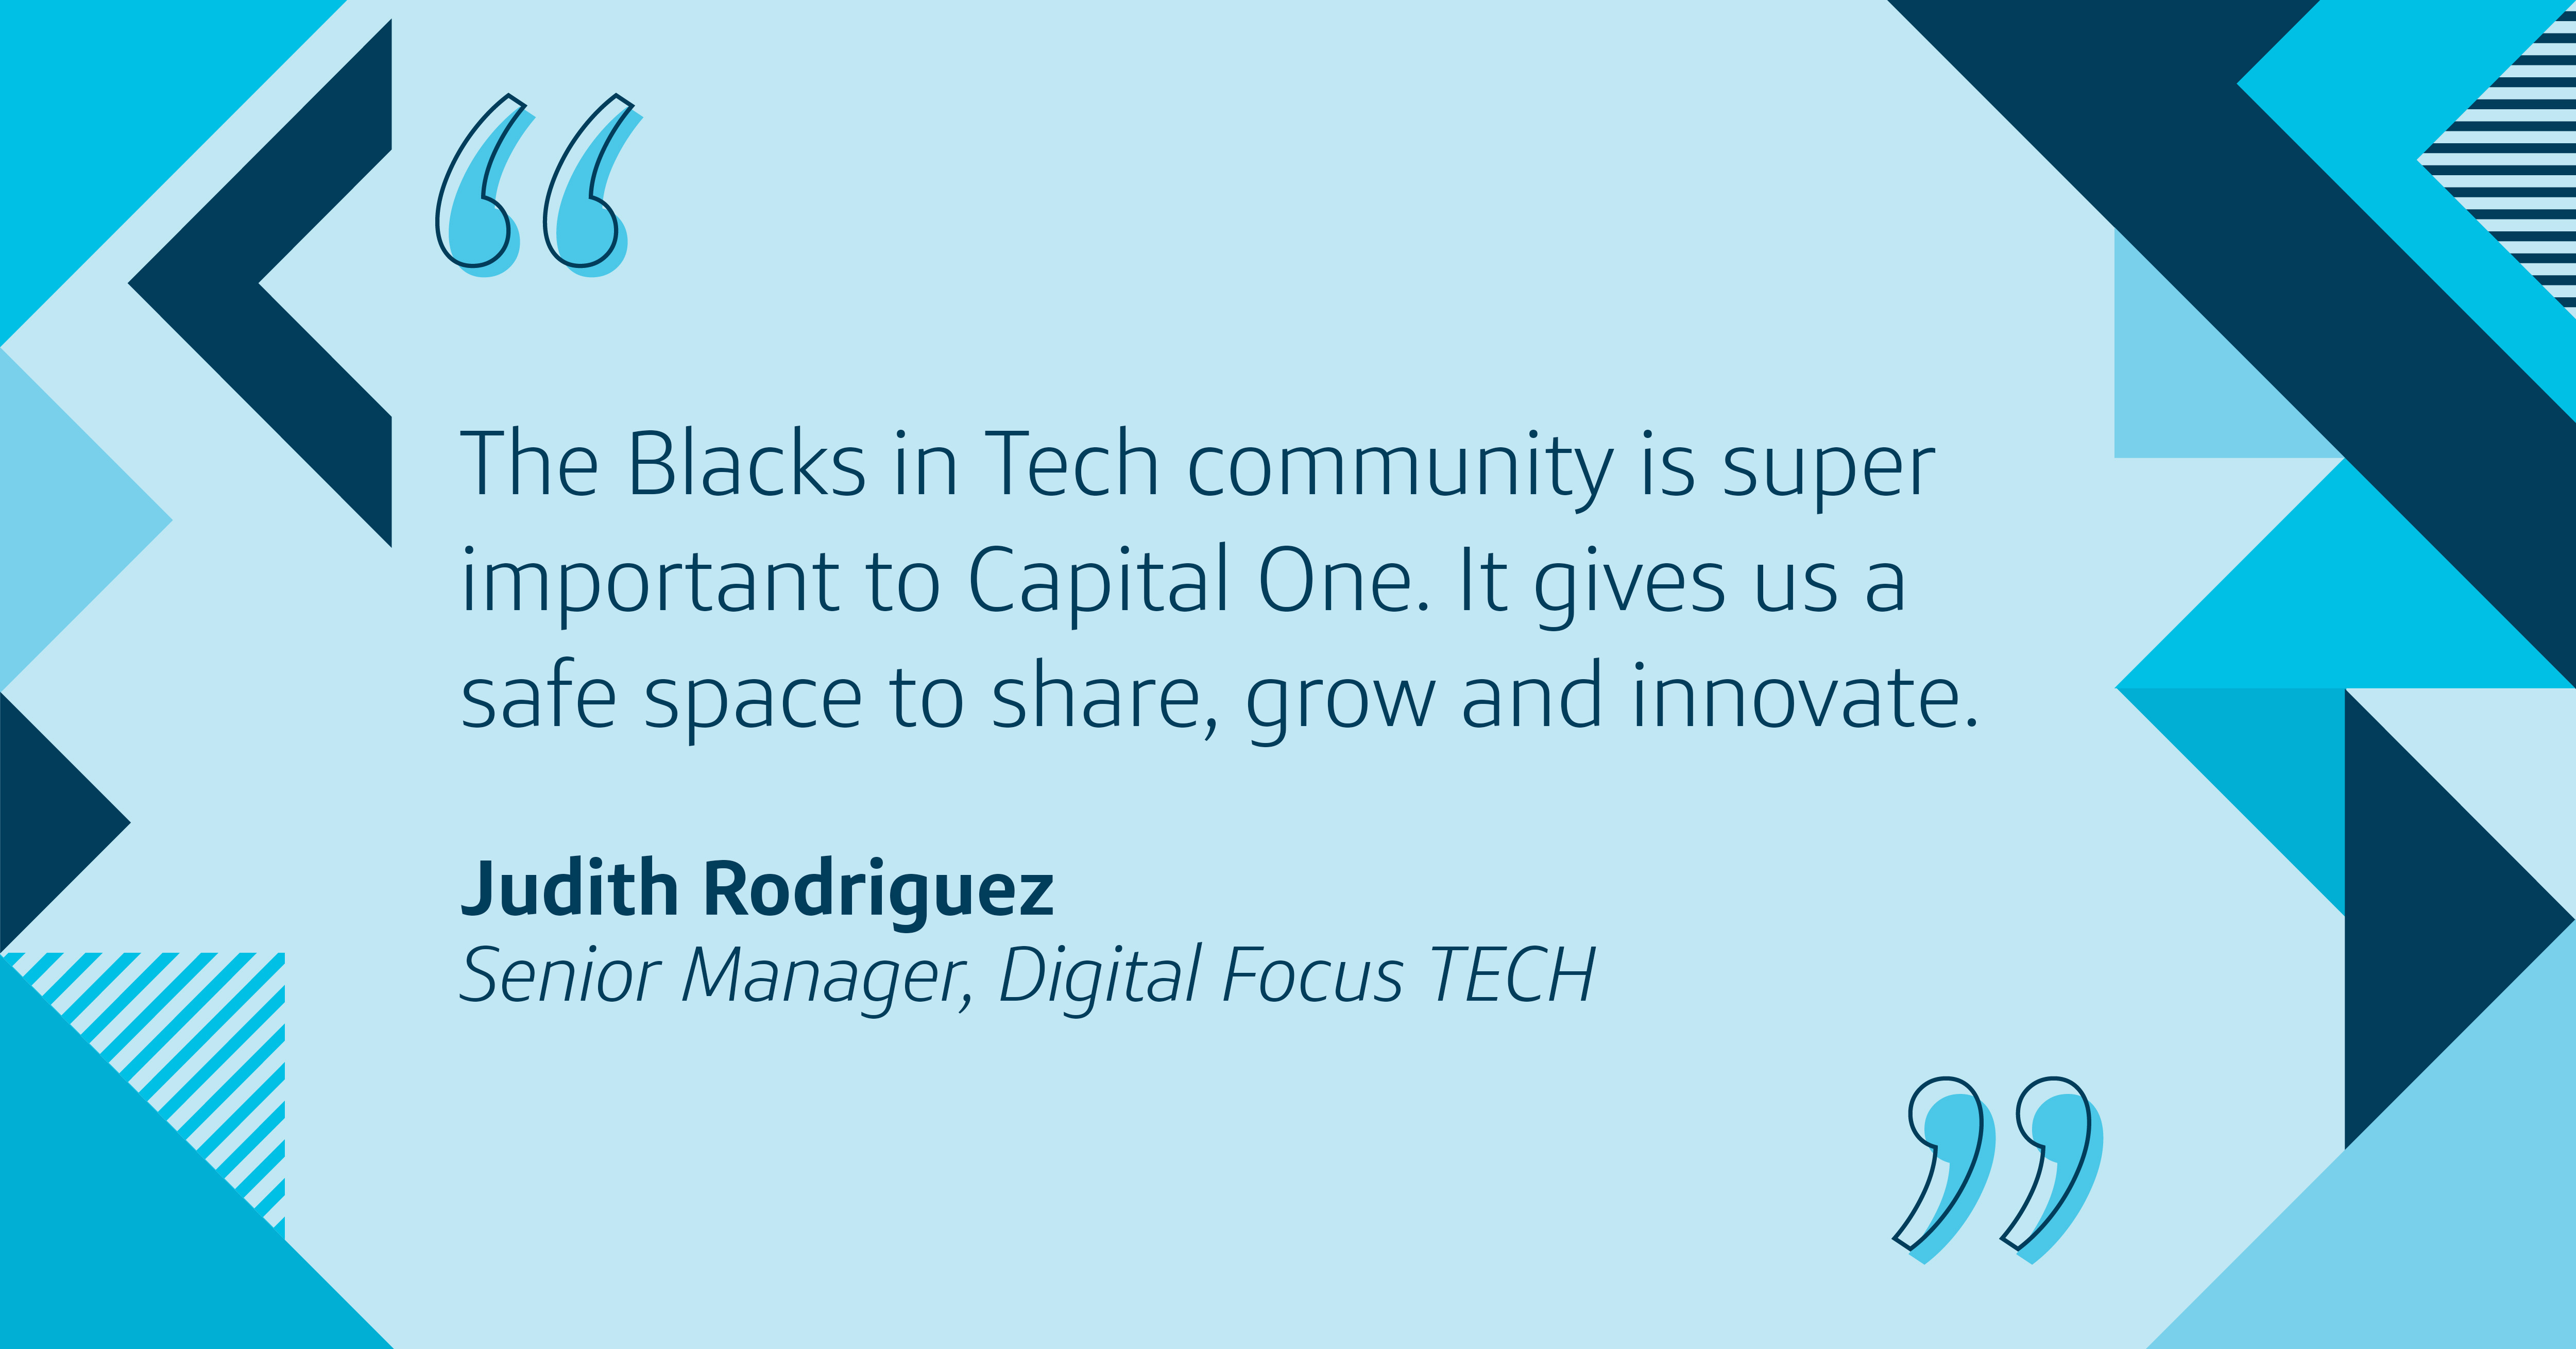 The Blacks in Tech community at Capital One is super important to Capital One. It gives us a safe space to share, grow and innovate.